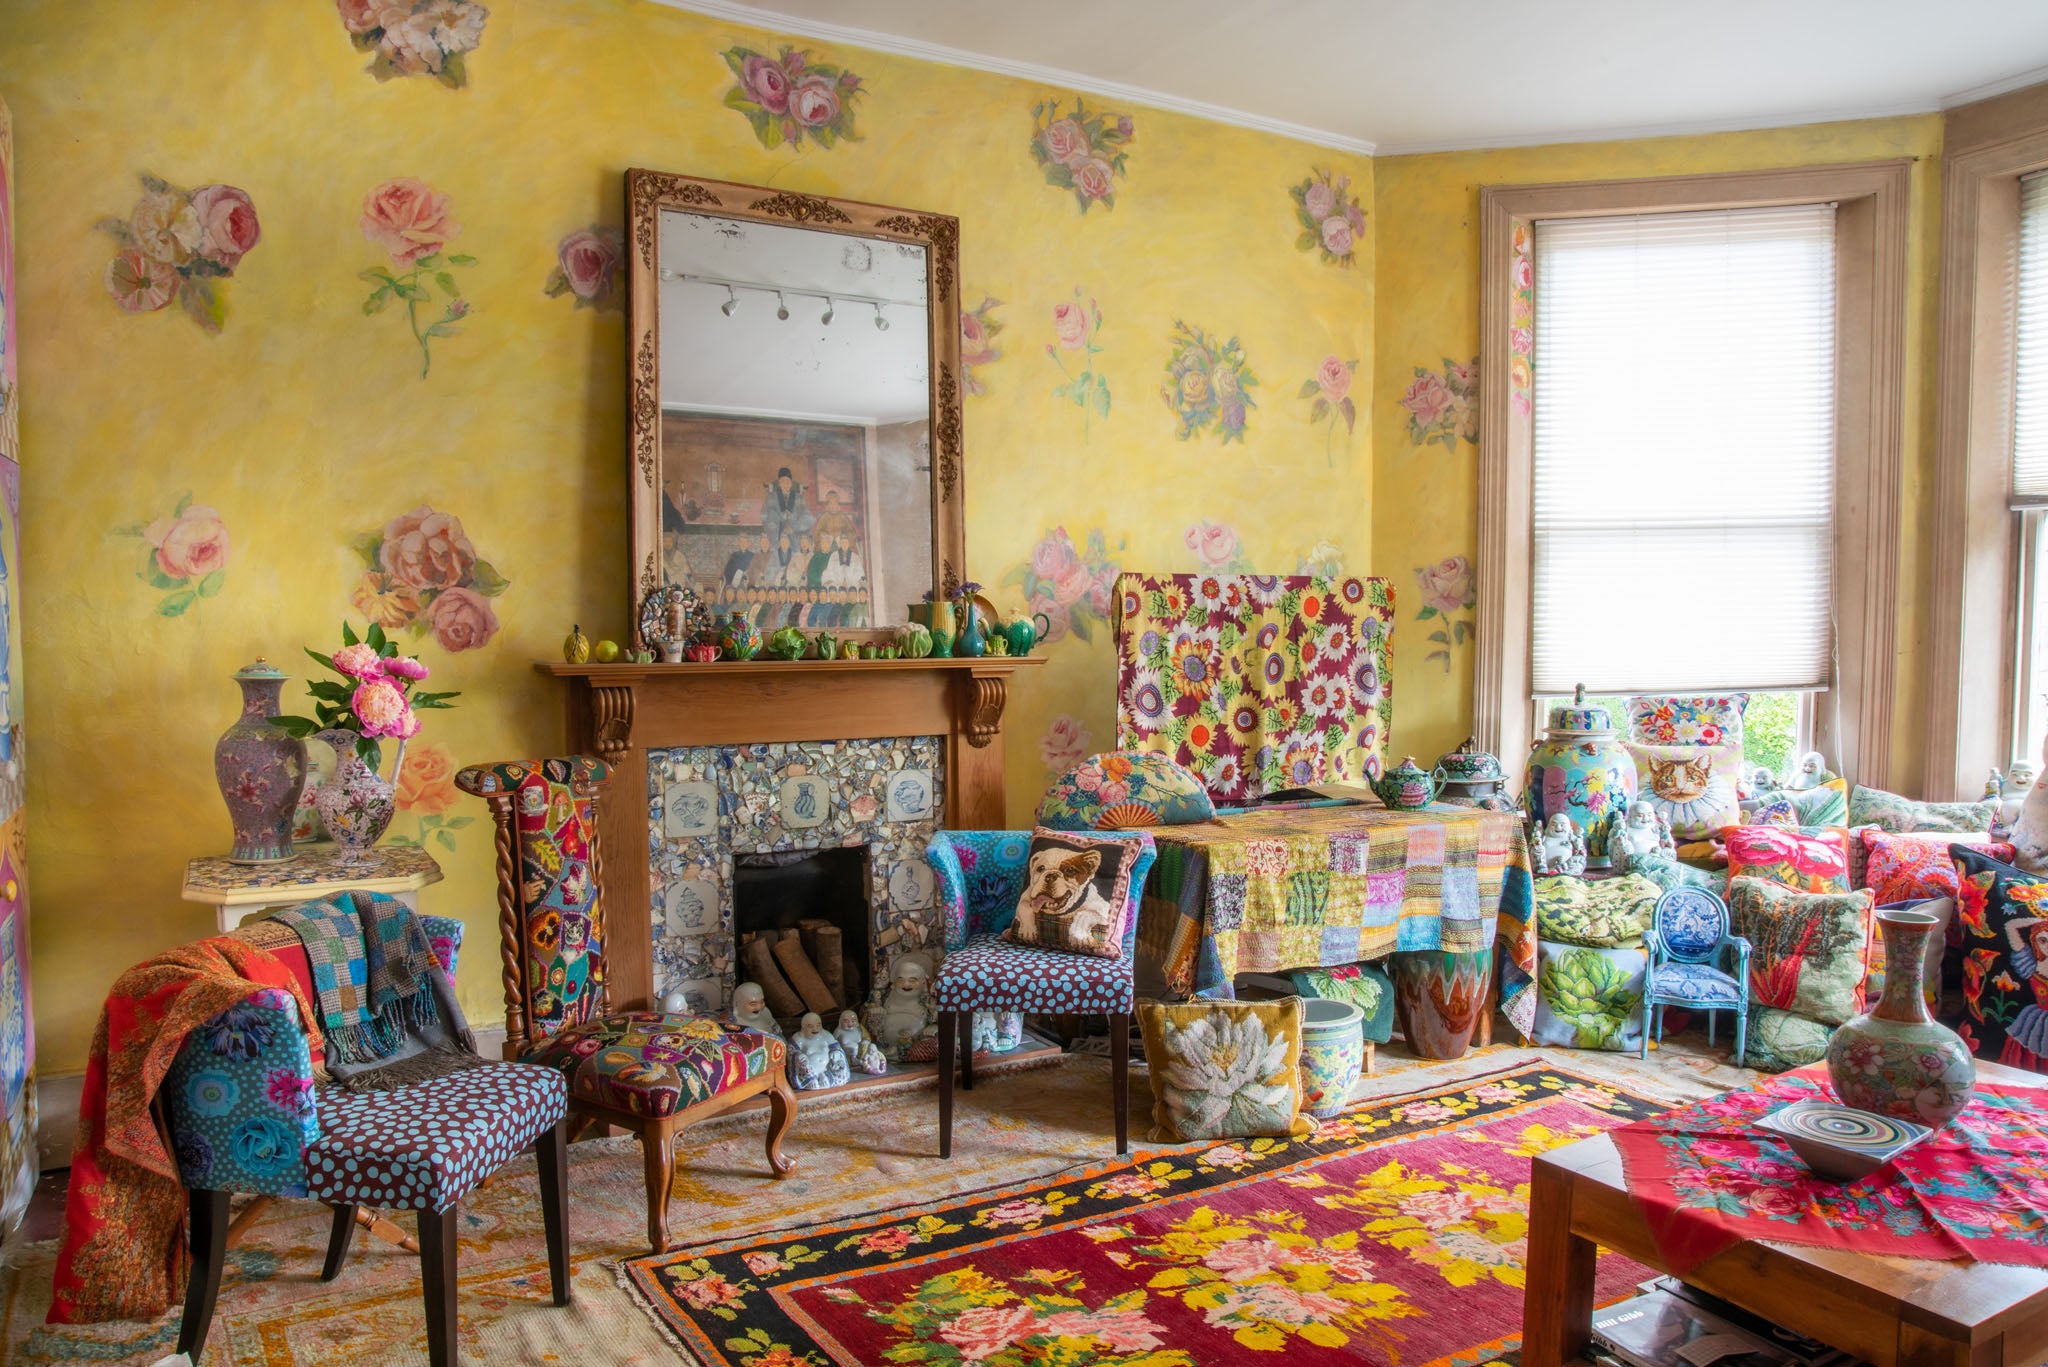 Kaffe Fassett in the Studio: Behind the Scenes with a Master